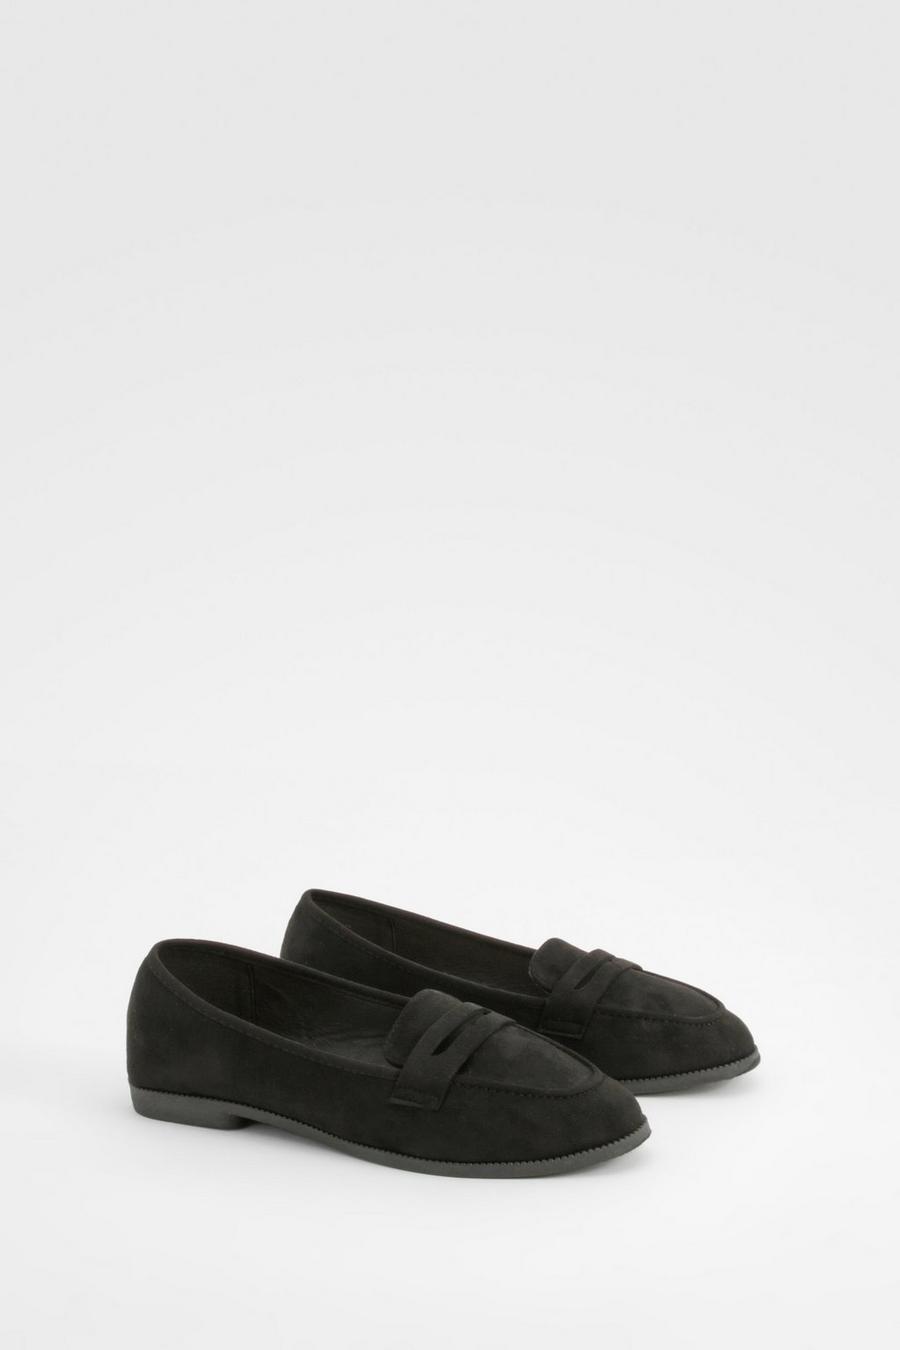 Mizuno Wide Fit Loafers 